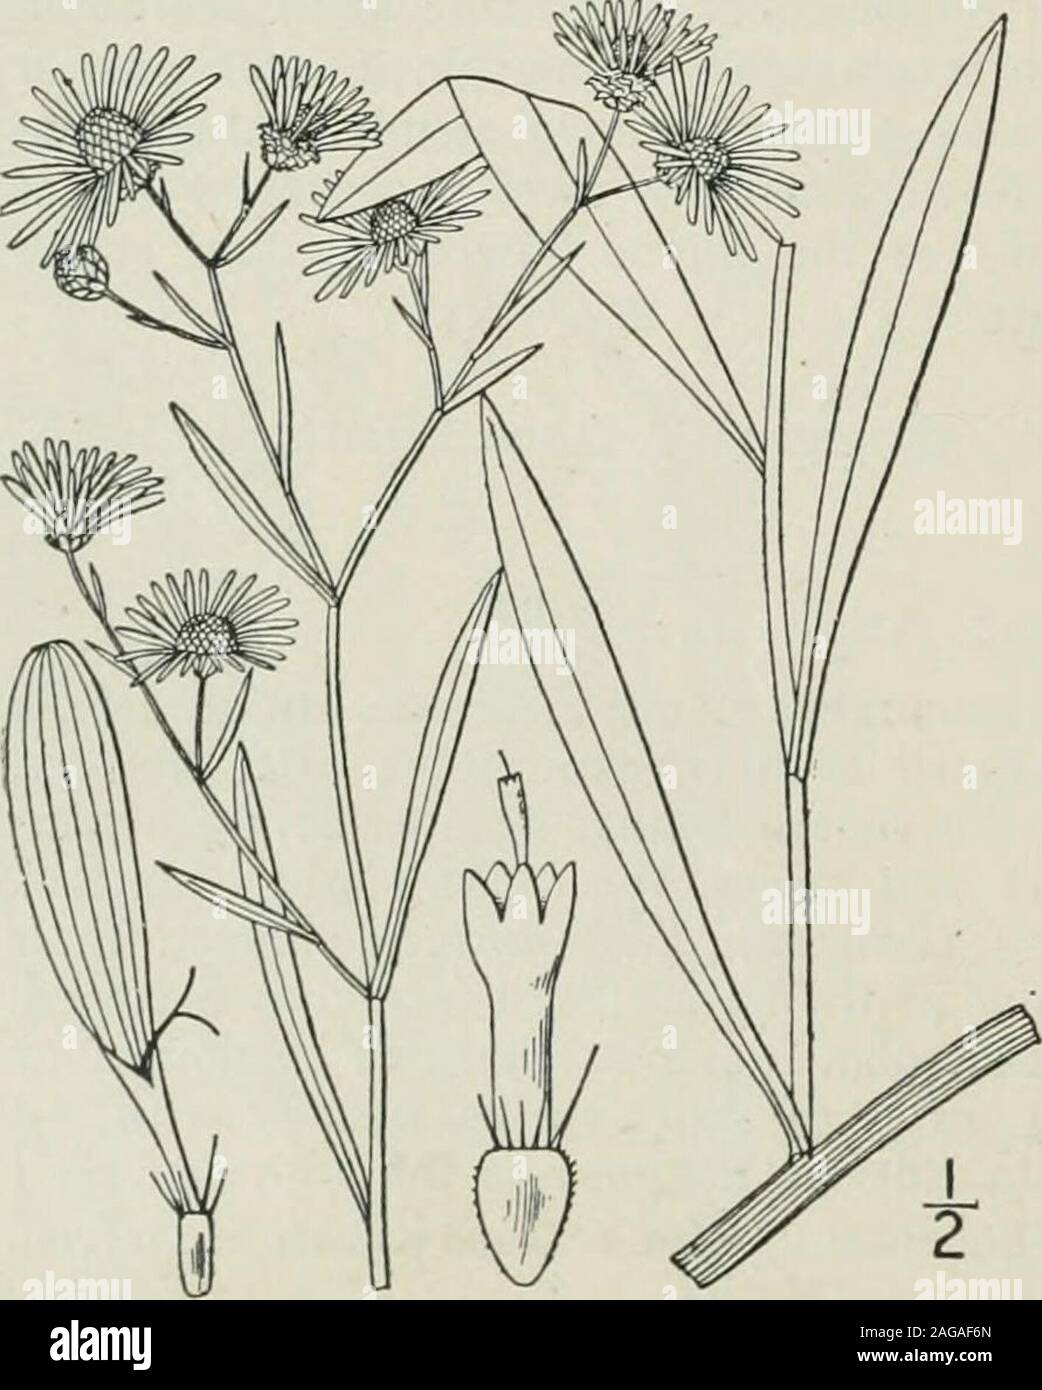 . An illustrated flora of the northern United States, Canada and the British possessions : from Newfoundland to the parallel of the southern boundary of Virginia and from the Atlantic Ocean westward to the 102nd meridian. te, acutish or obtuse;achenes obovate, narrowly winged; pappus of severalshort scales and 2 subulate bristles shorter than theachene. In dry soil, southern Illinois to Texas, east to South Caro-lina and Florida. Aug.-Oct. 2. Boltonia asteroides (L.) LHer. Aster-like Boltonia. Fig. 4276. Matricaria asteroides L. Mant. 116. 1767.Matricaria glastifolia Hill, Hort. Kew. 19: pi. 3 Stock Photo